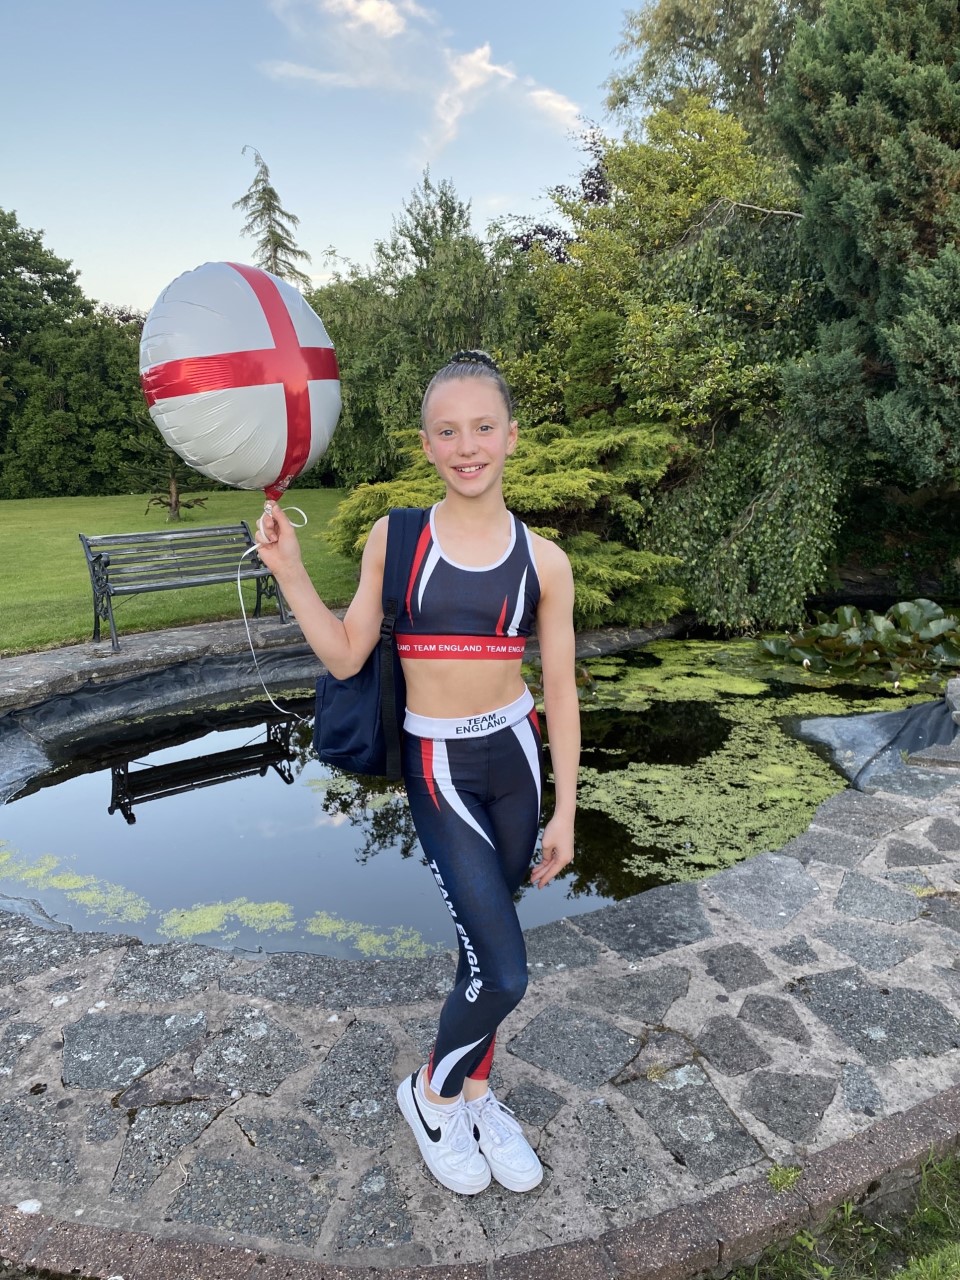 Year 7 student Gracie represents England in the World Dance Championships